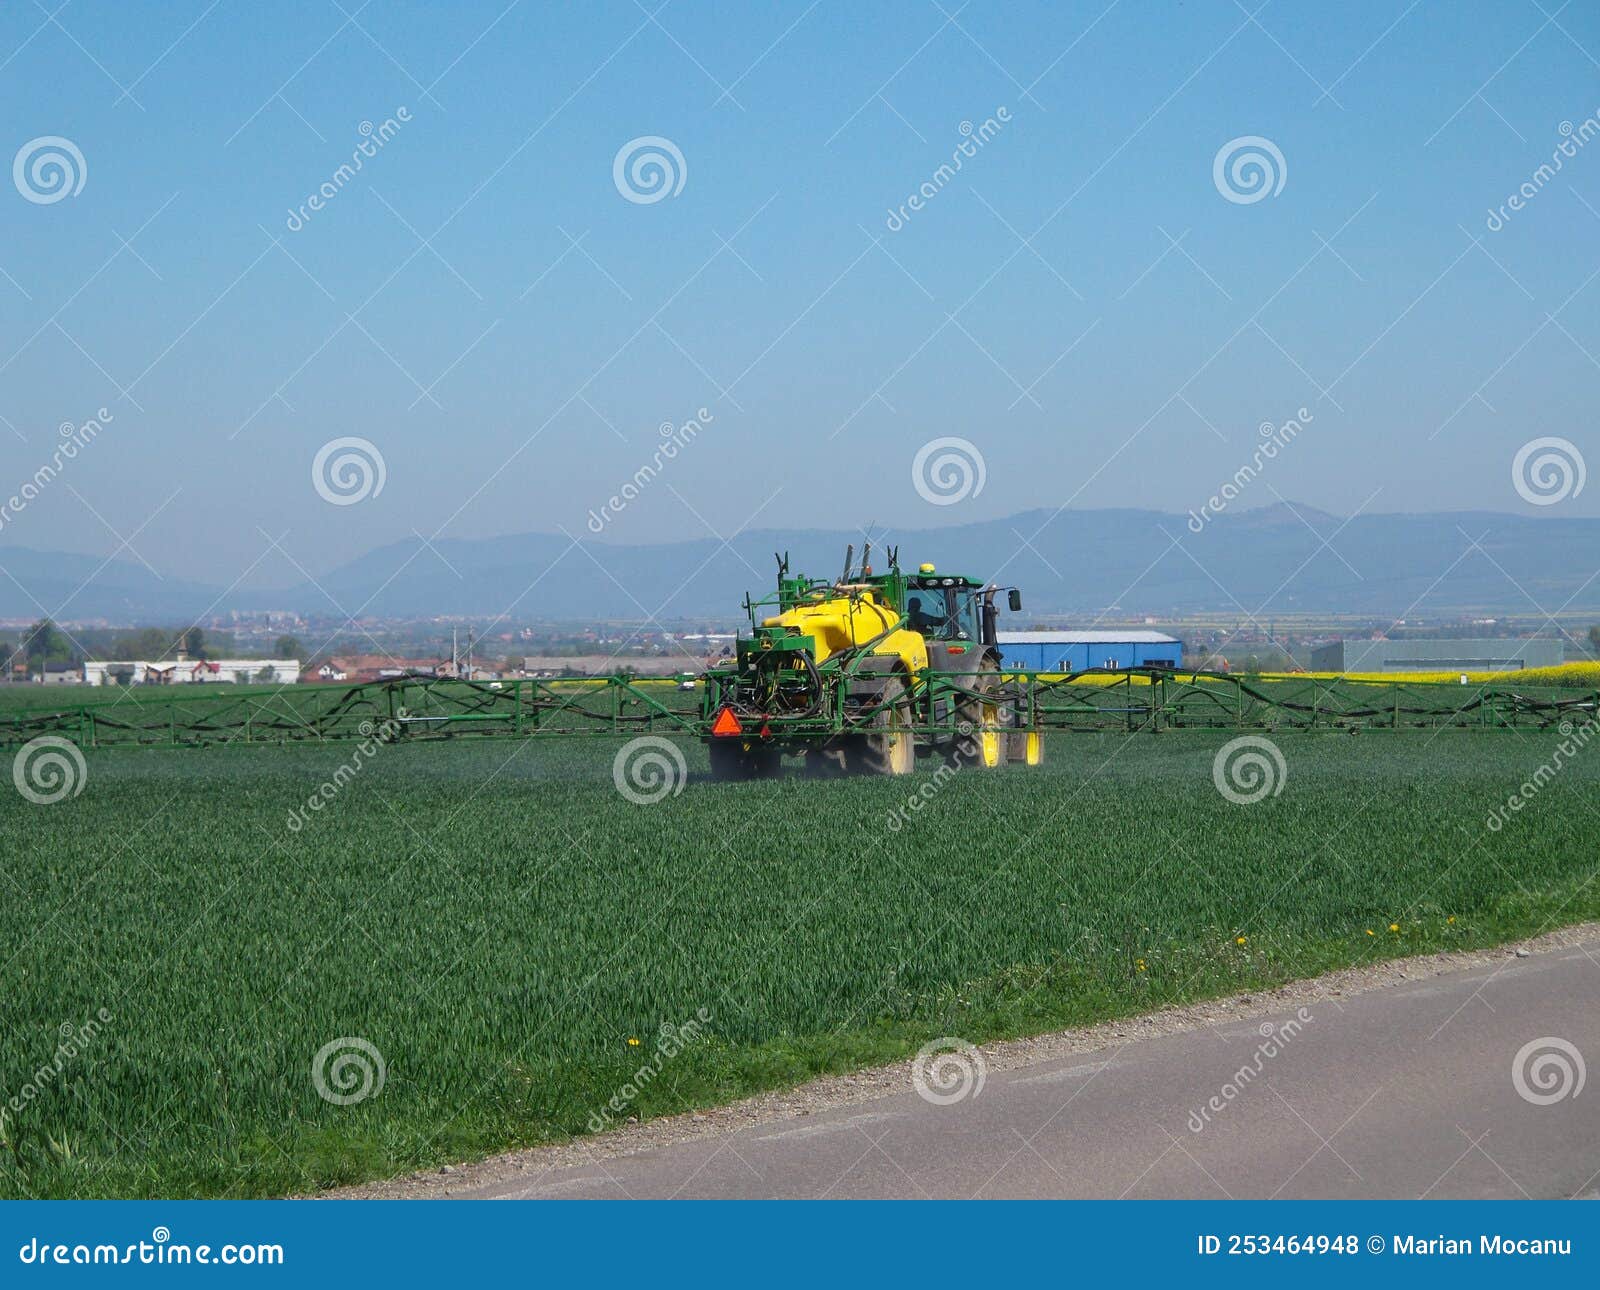 a big tractor irrigates the field